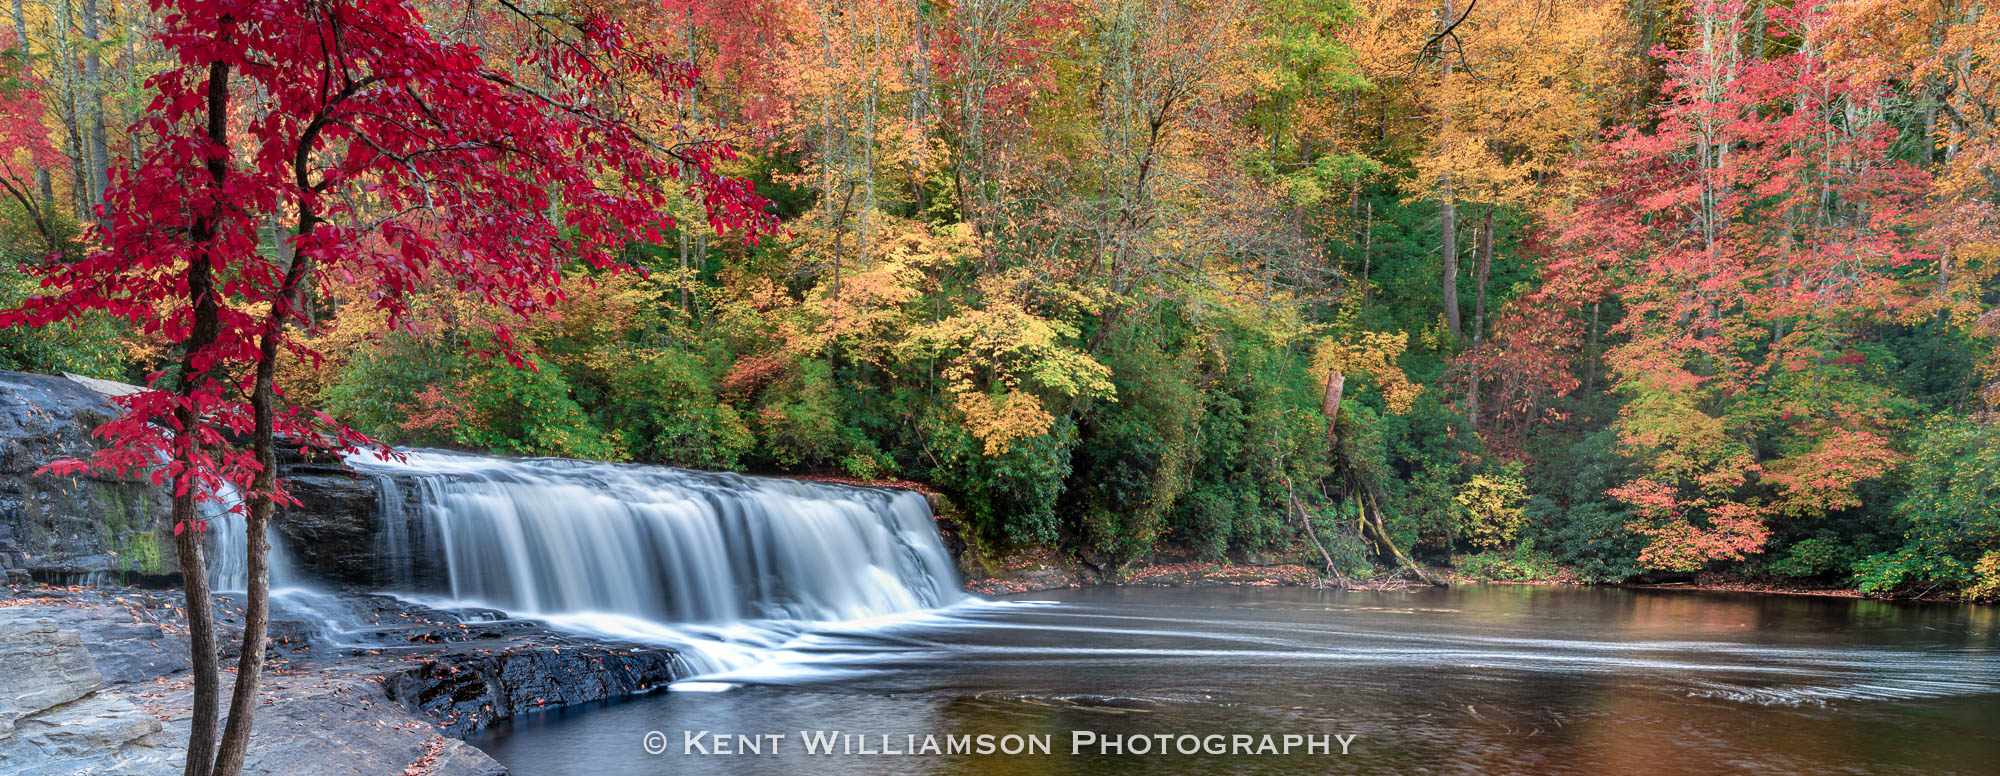 Emerging Fall color along Little River at Hooker Falls in DuPont State Forest, North Carolina.  Fall 2022